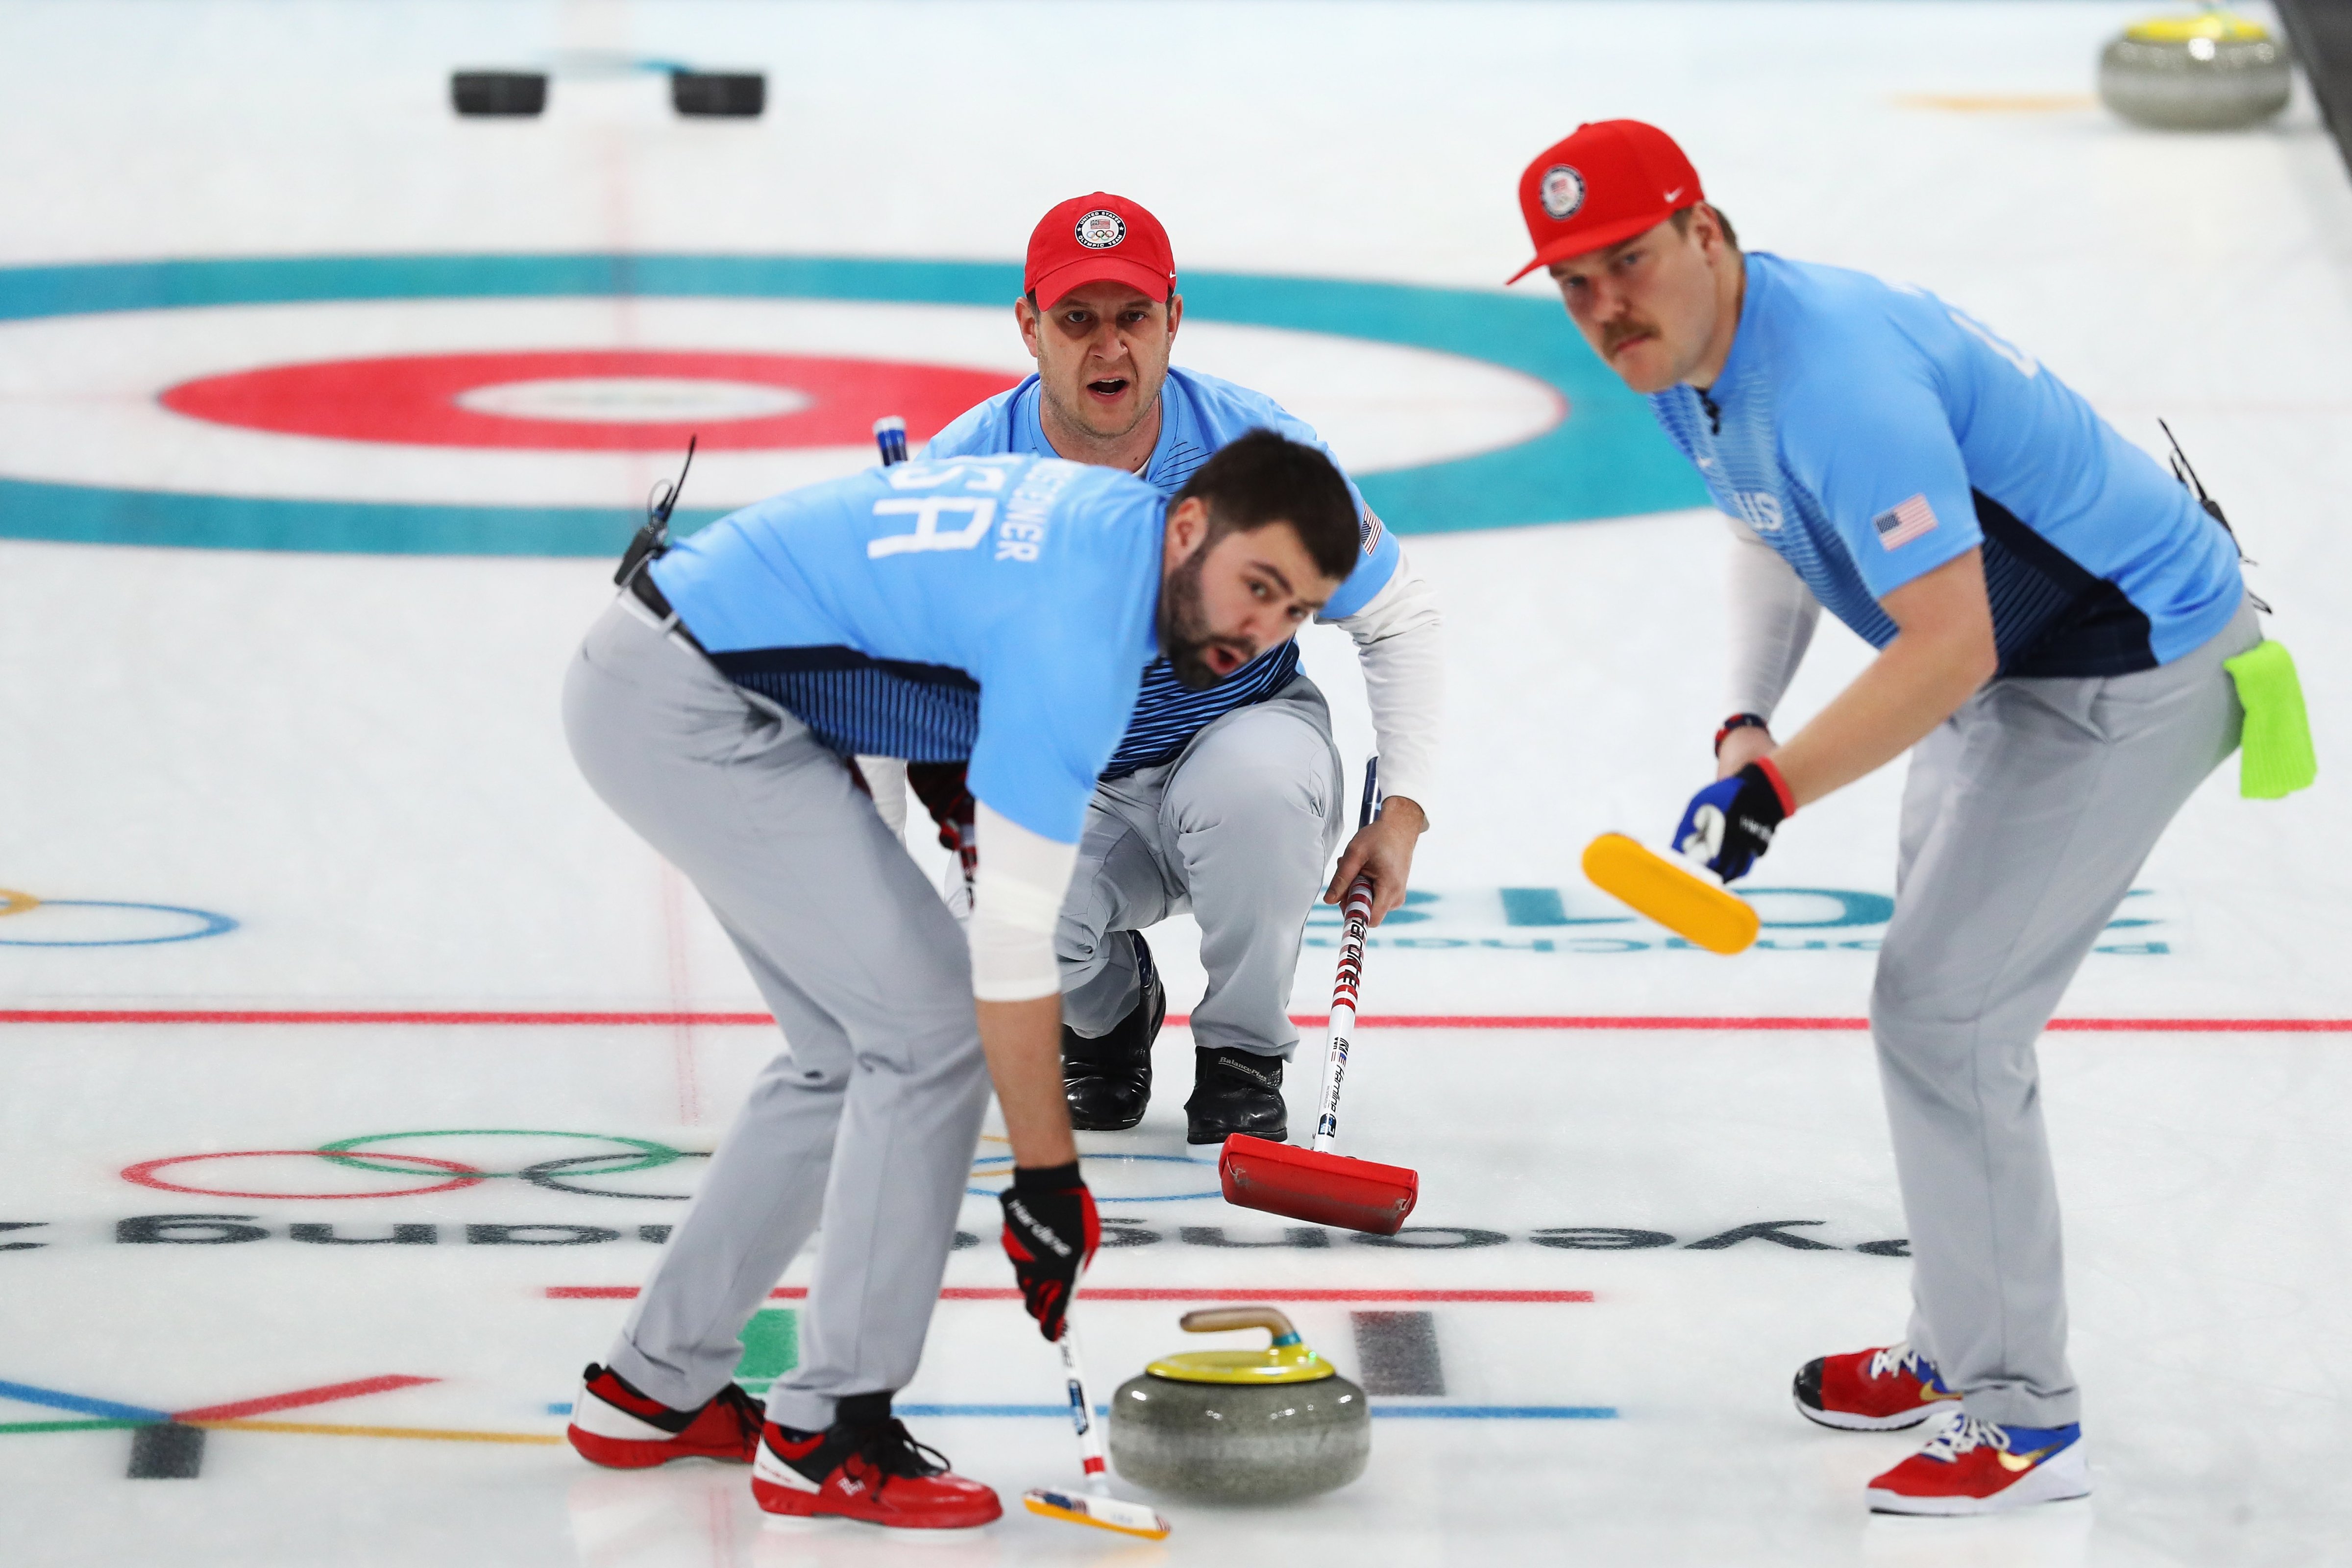 Matt Hamilton, John Shuster, John Landsteiner of USA compete in the Curling Men's Semi-final against Canada on day thirteen of the PyeongChang 2018 Winter Olympic Games at Gangneung Curling Centre on February 22, 2018 in Gangneung, South Korea. (Dean Mouhtaropoulos—Getty Images)